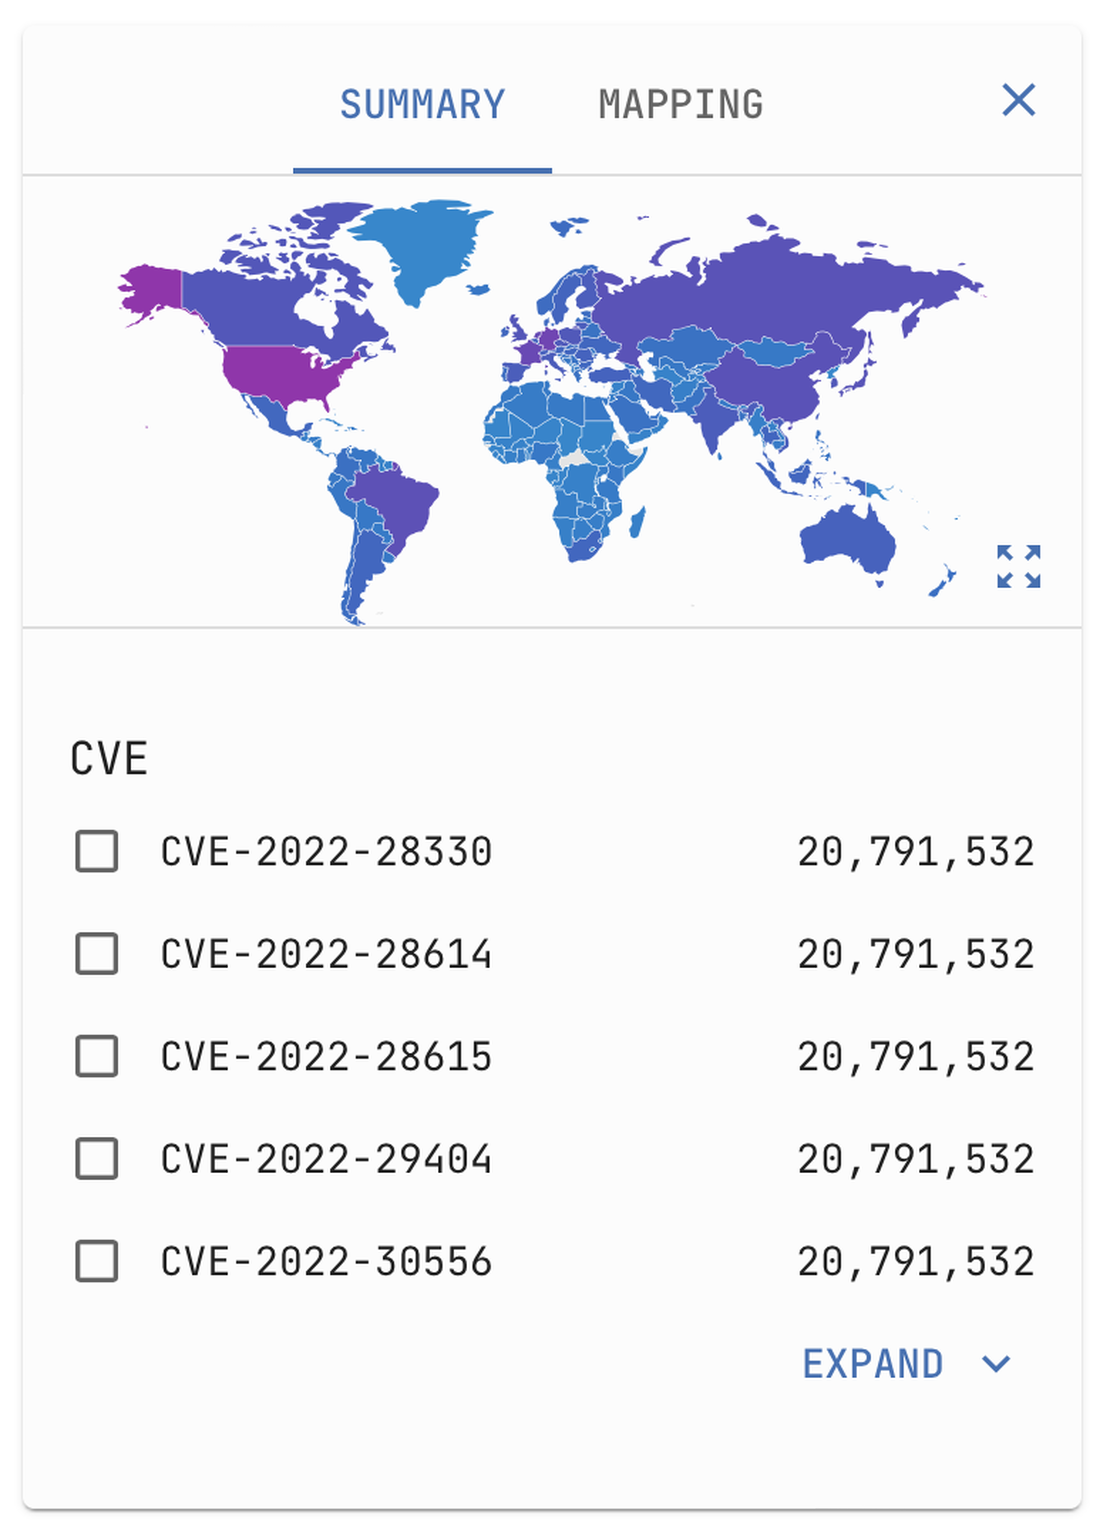 Vulnerable devices distribution on the world map